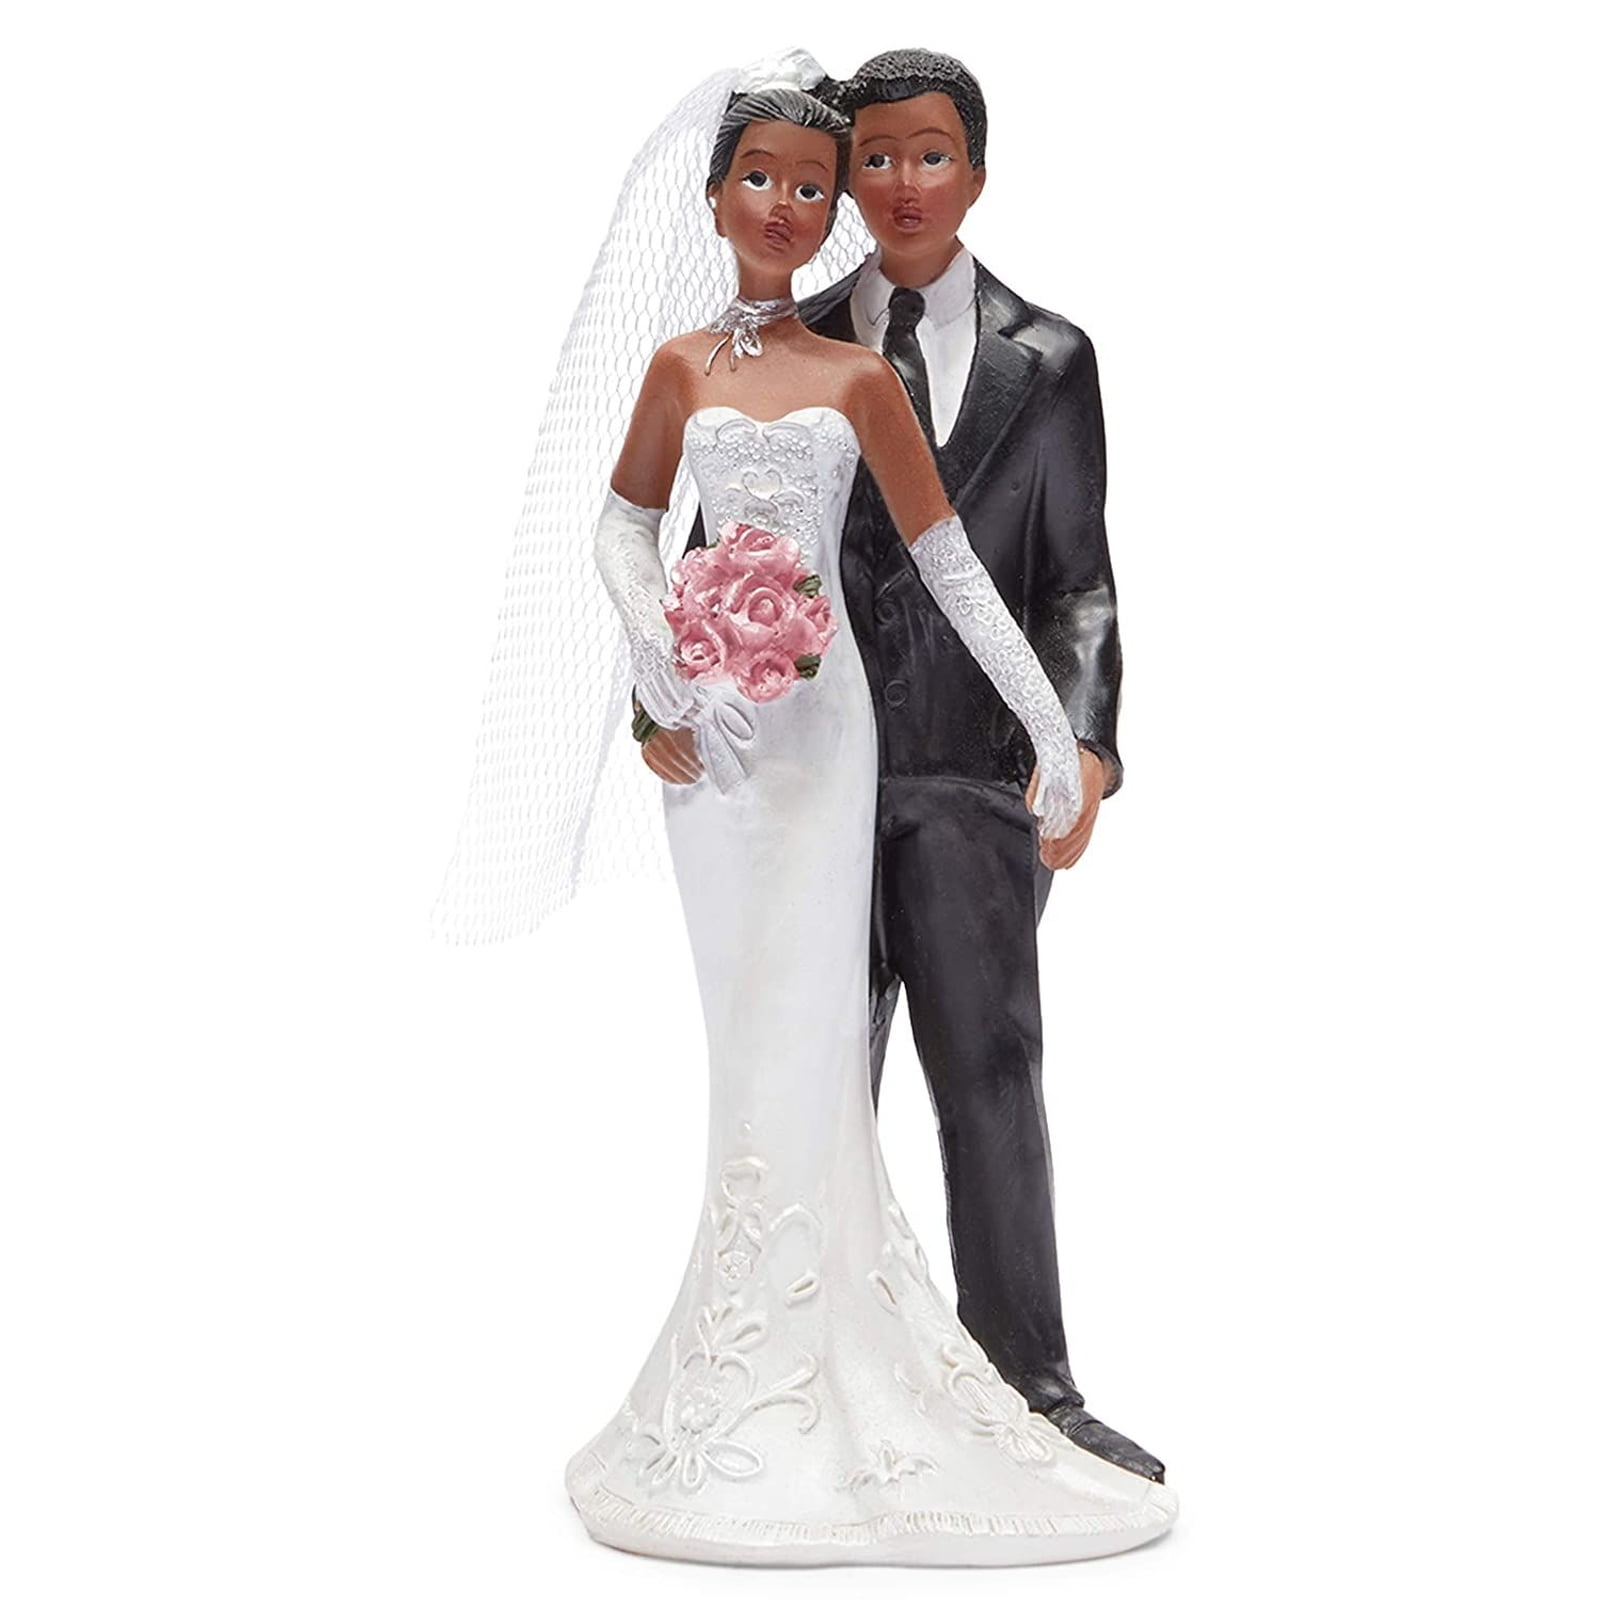 PK 3 BRIDE AND GROOM EMBELLISHMENT TOPPERS FOR CARDS & CRAFTS 